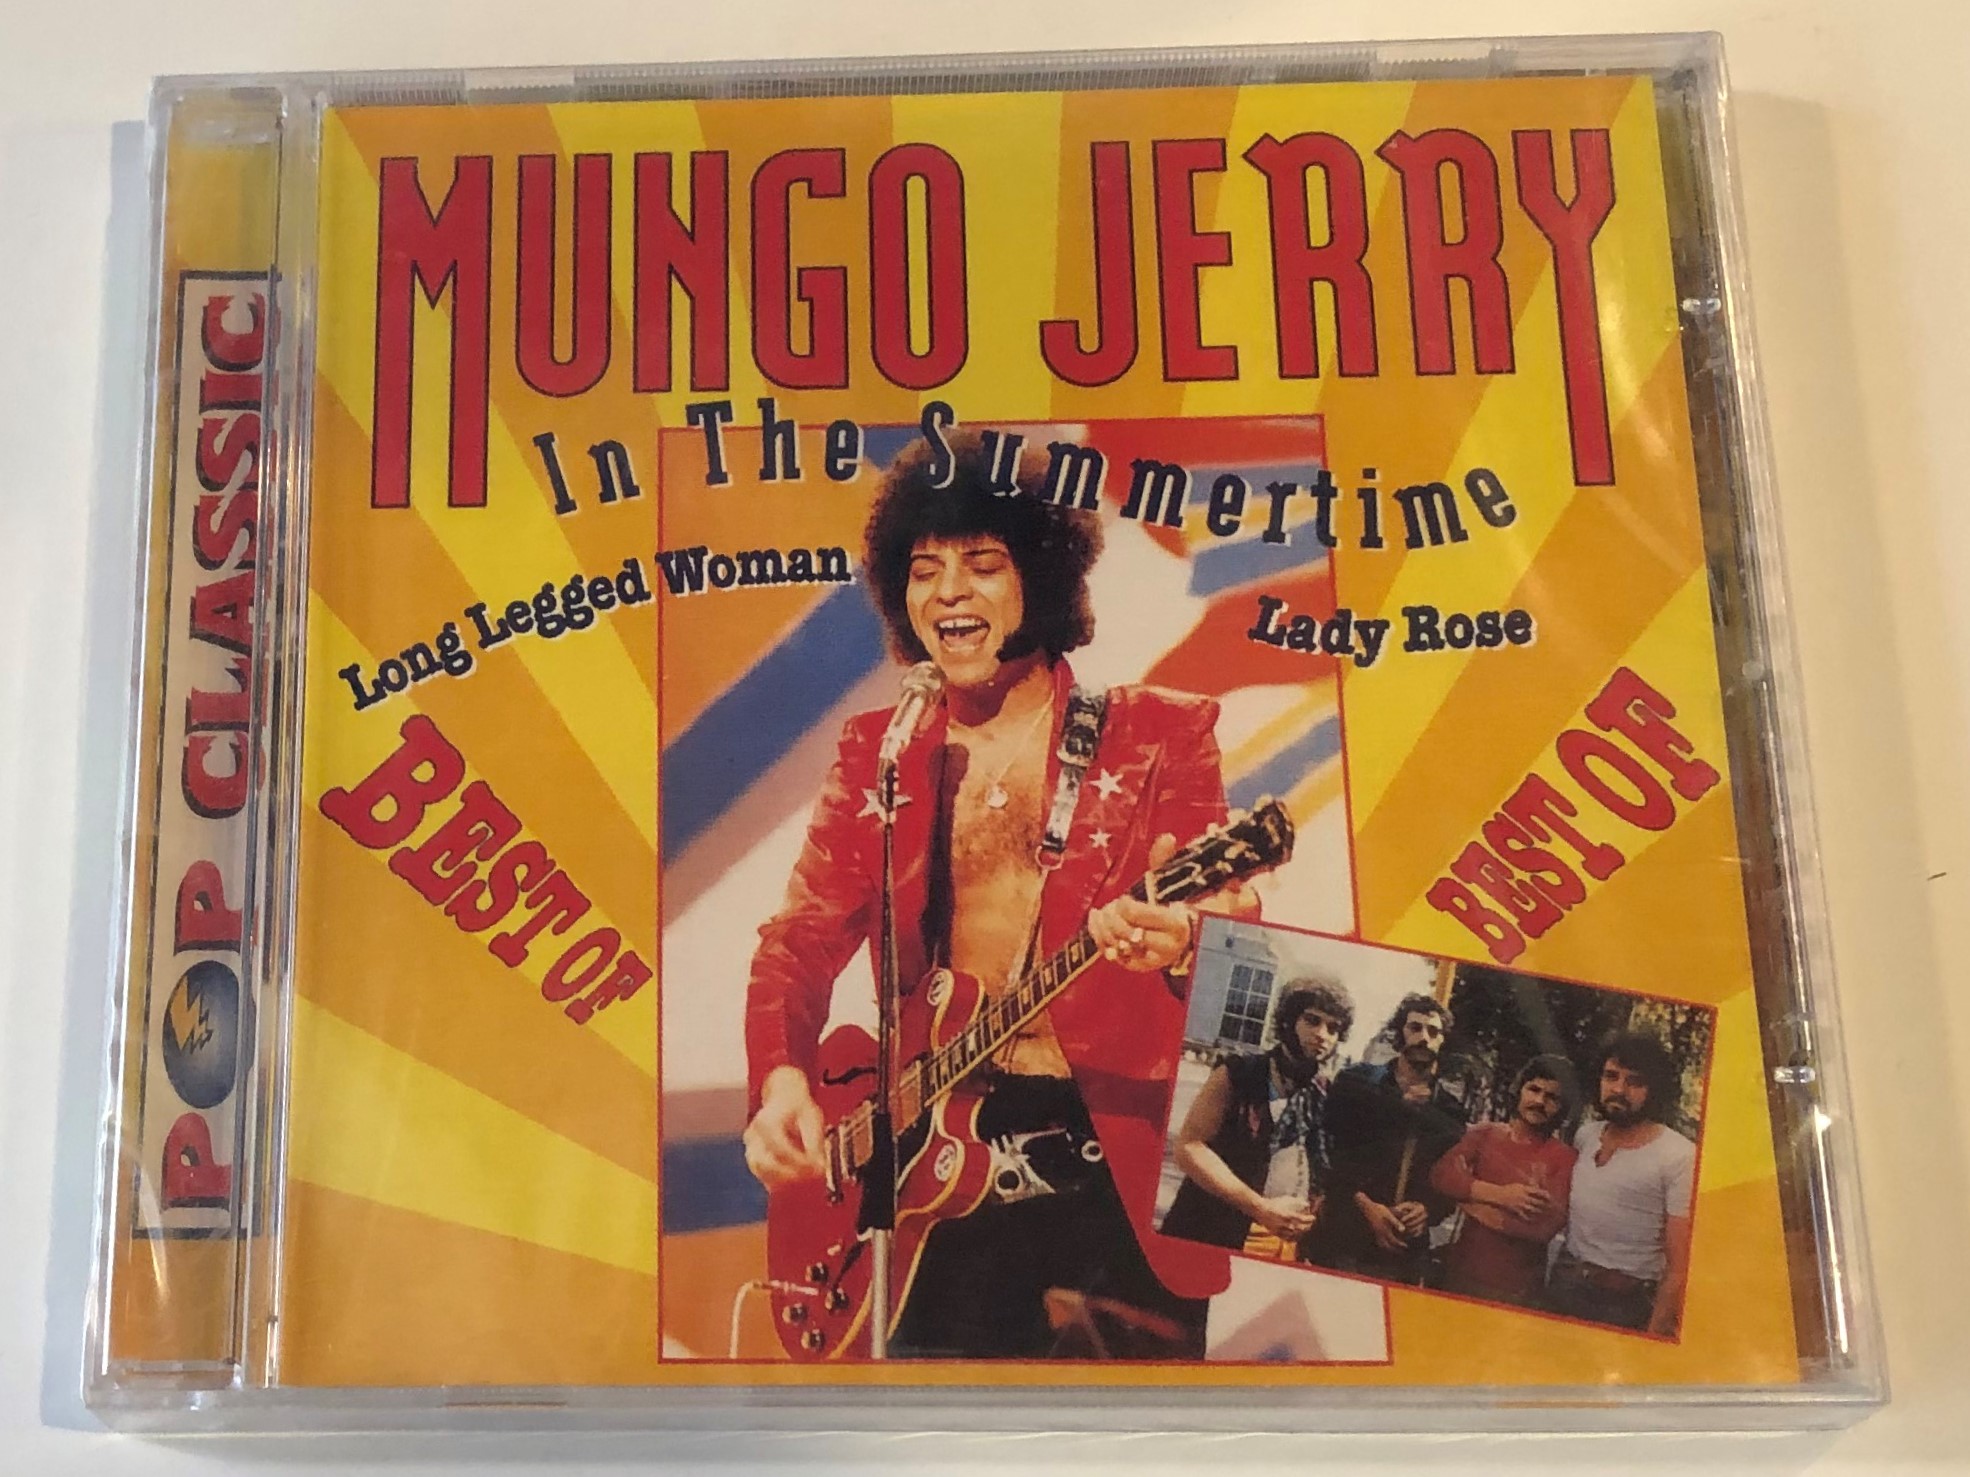 mungo-jerry-best-of-in-the-summertime-long-legged-woman-lady-rose-pop-classic-audio-cd-5998490700300-1-.jpg